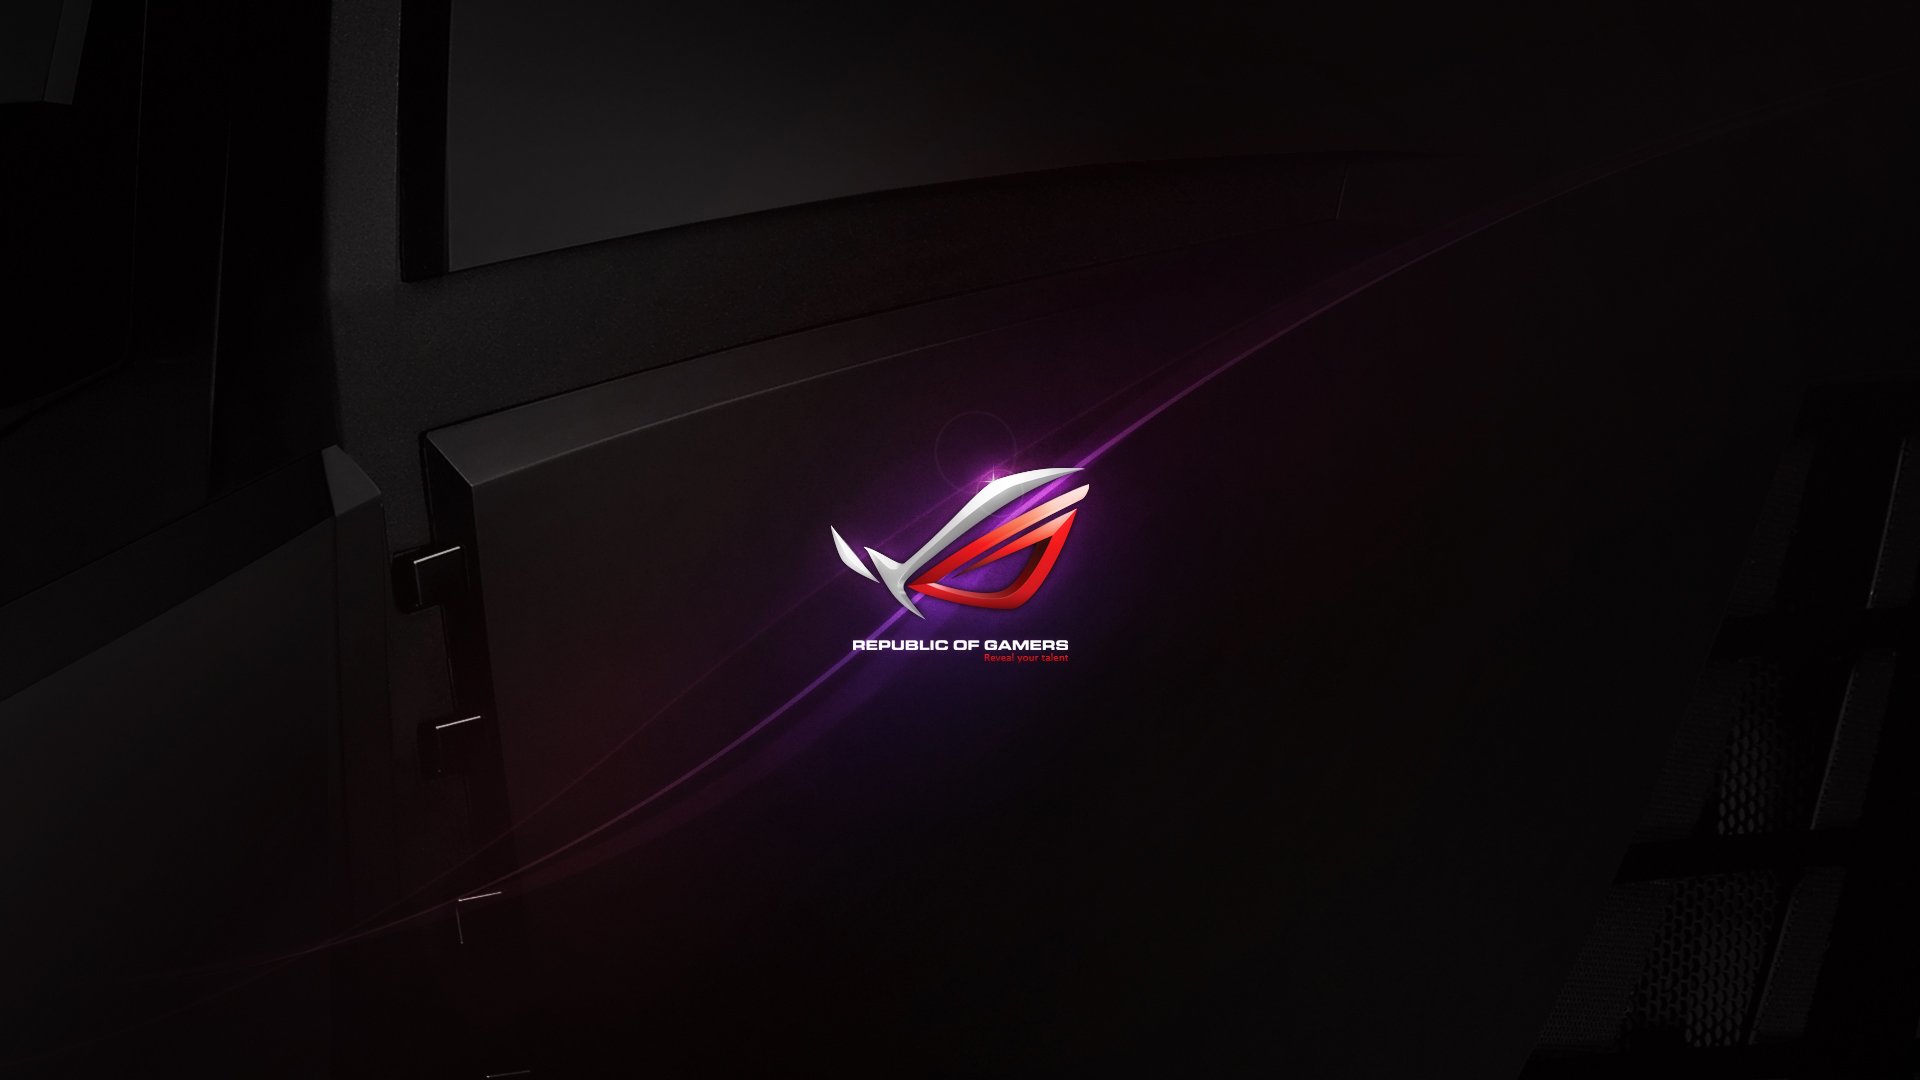 ASUS REPUBLIC GAMERS computer game wallpaper background